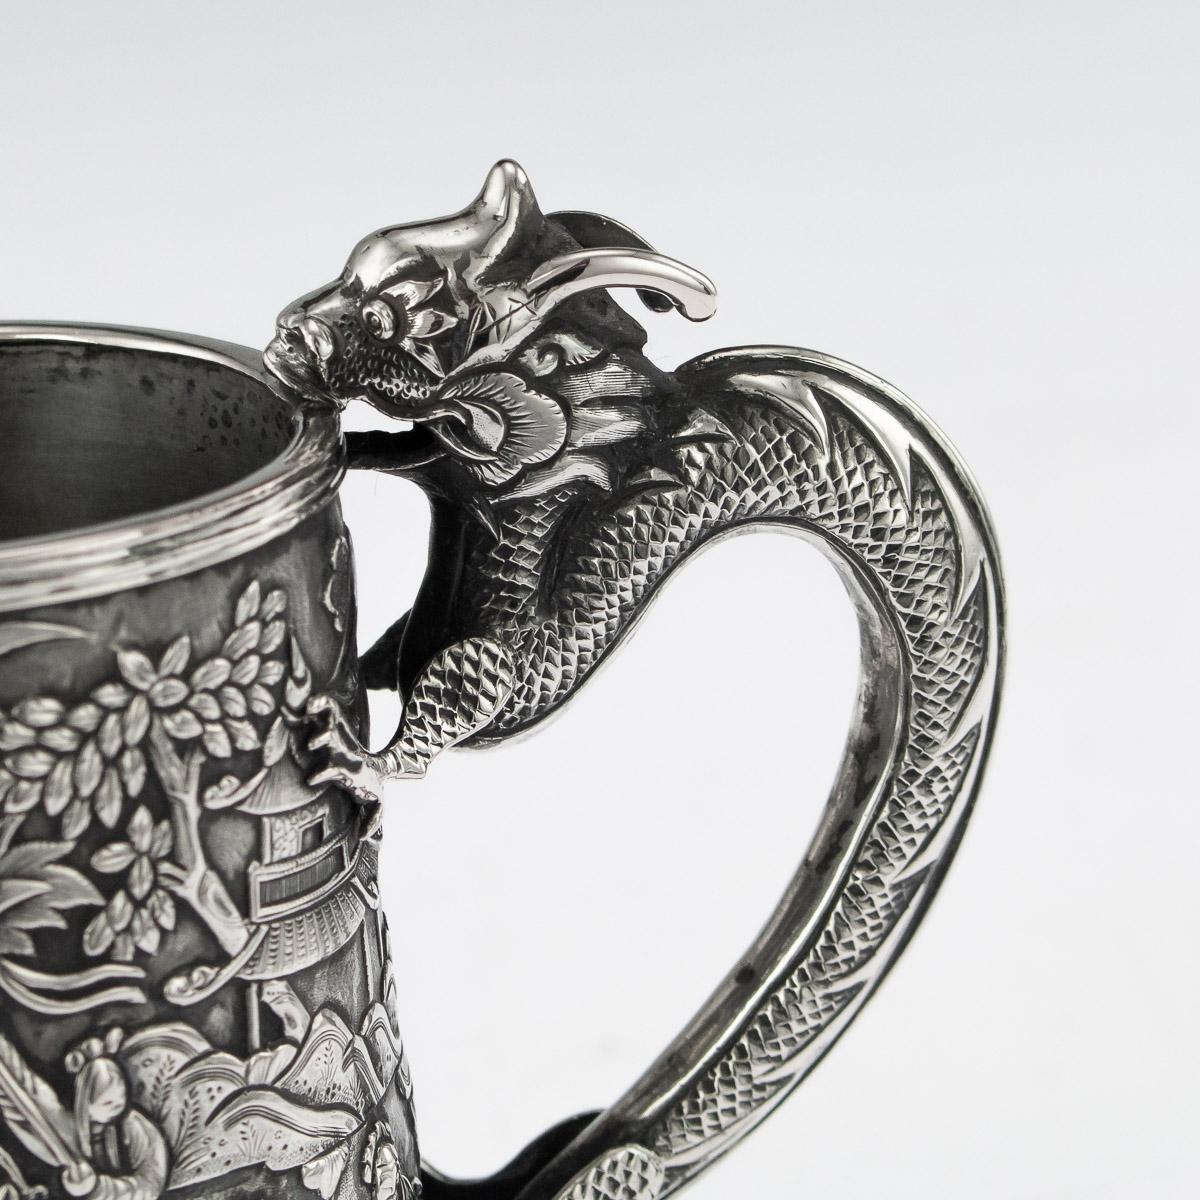 19thC Chinese Export Solid Silver Nobility Scenes Mug, Cutshing, c.1870 7